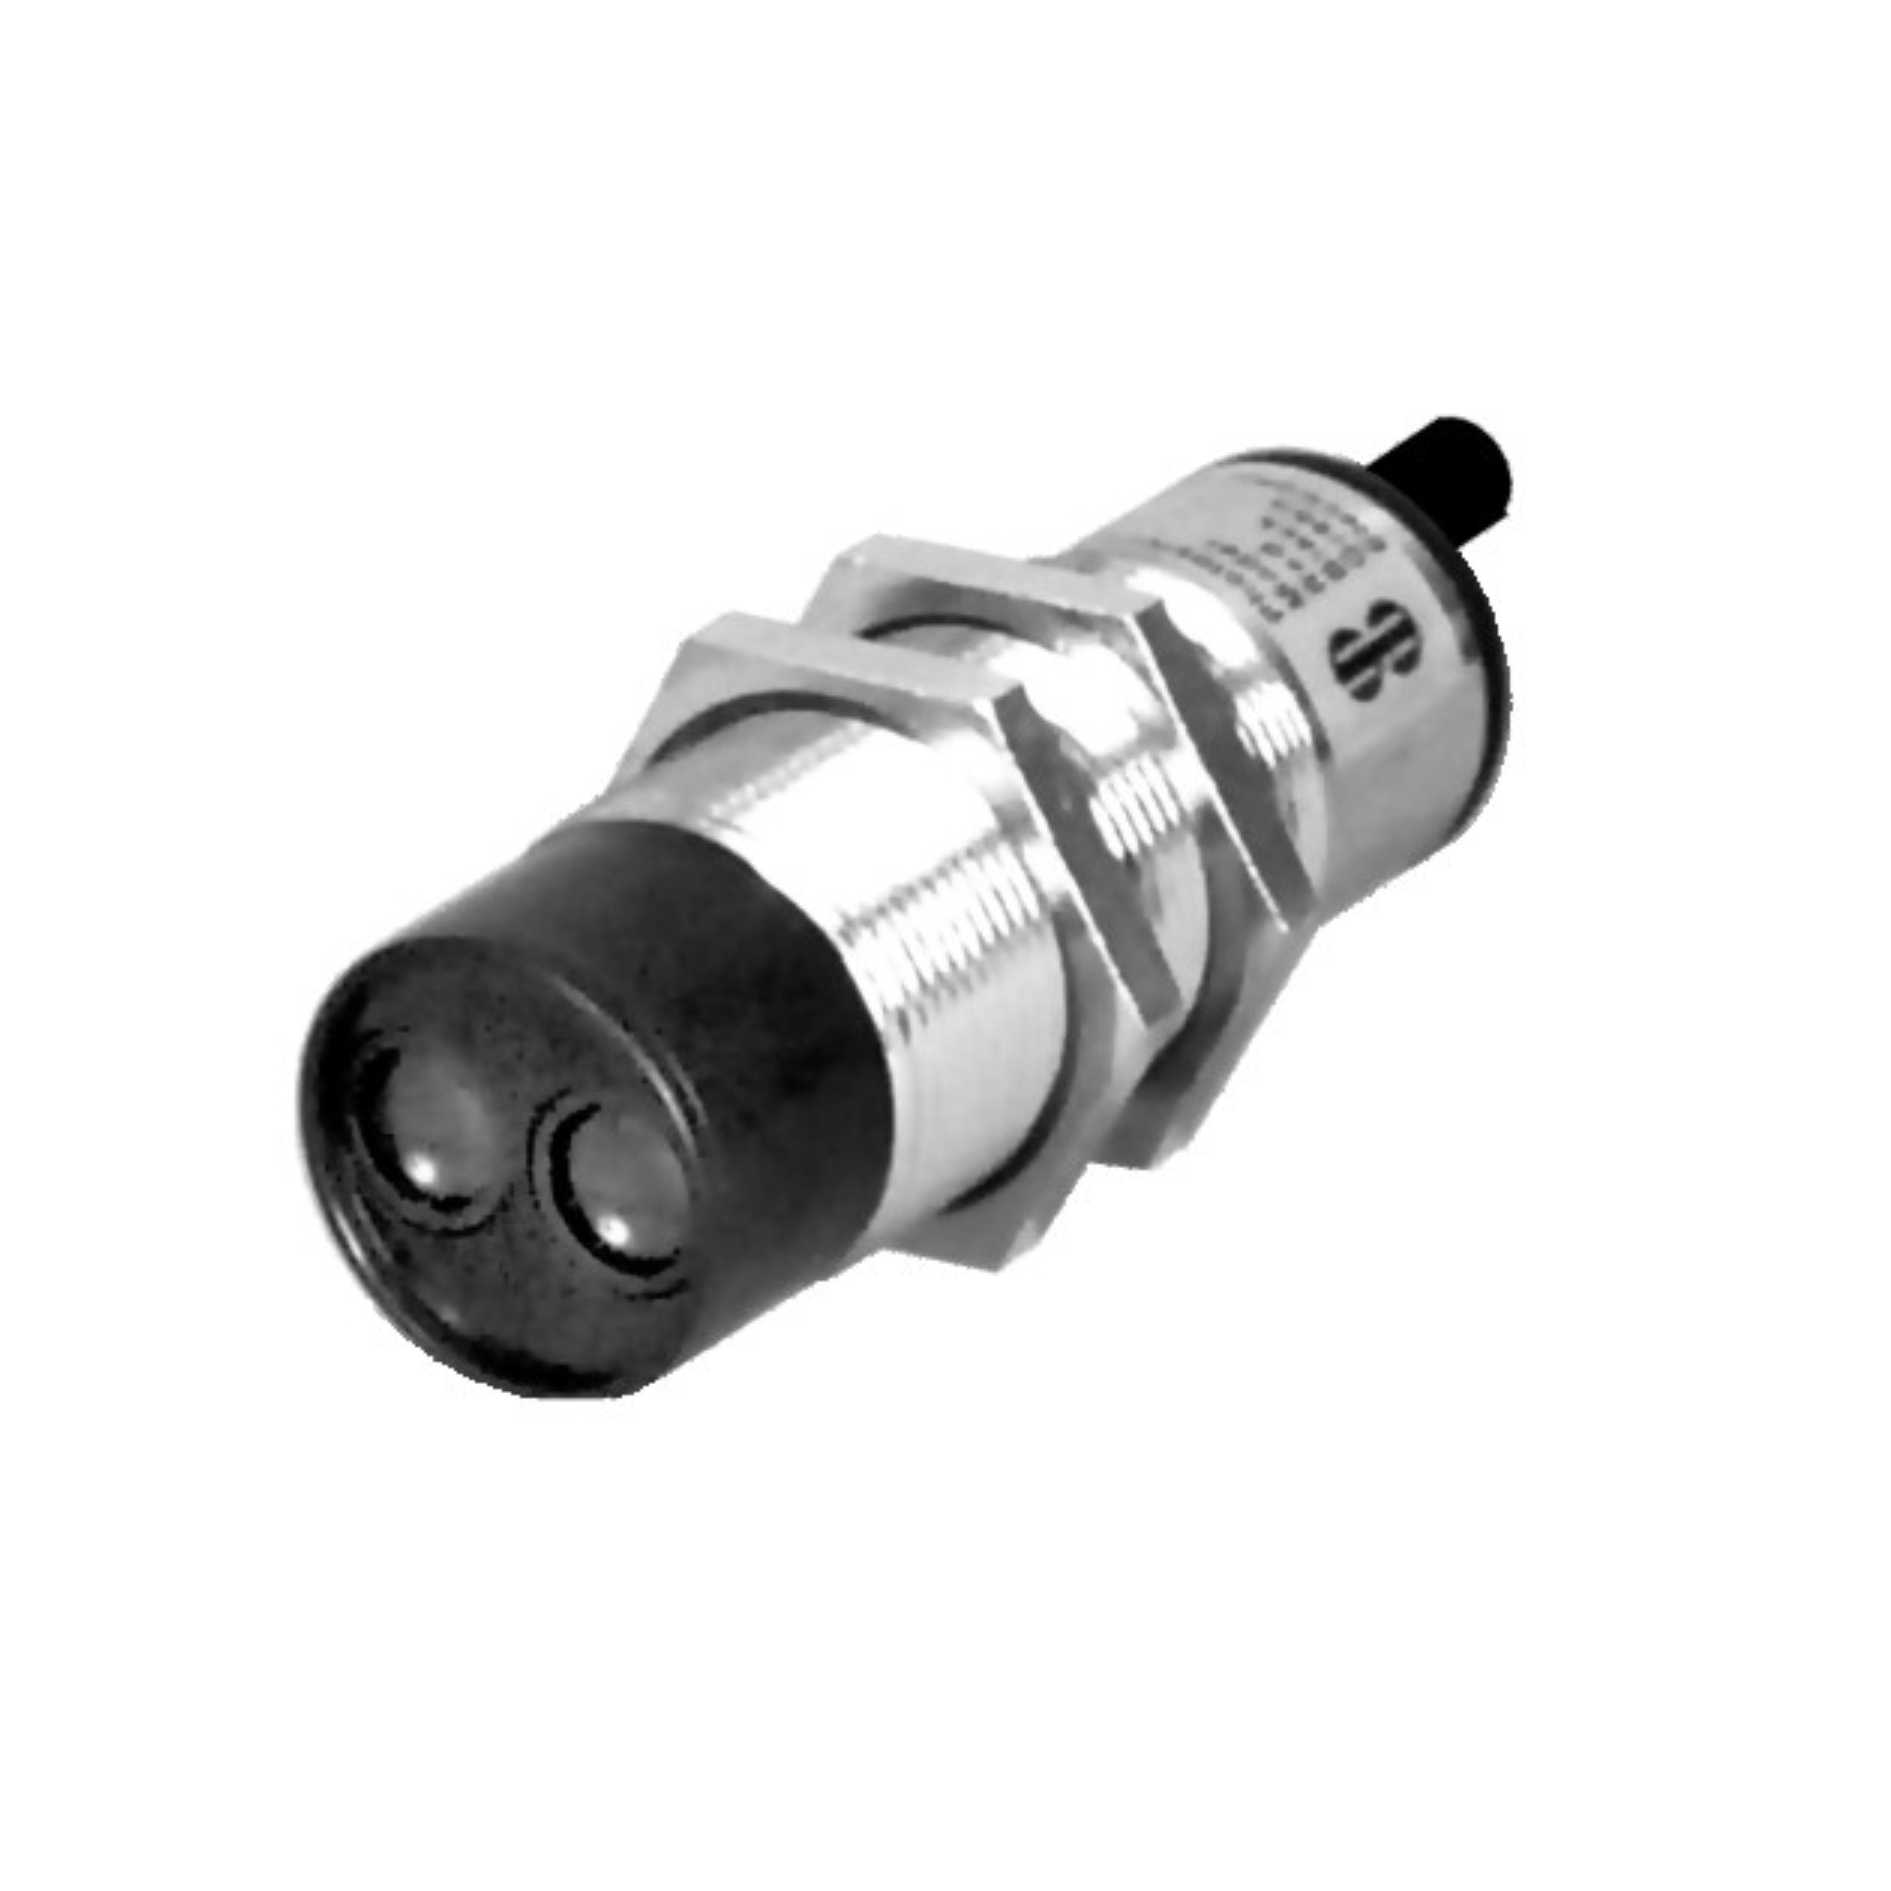 Infra Red Diffuse Sensor - Dia 30 mm